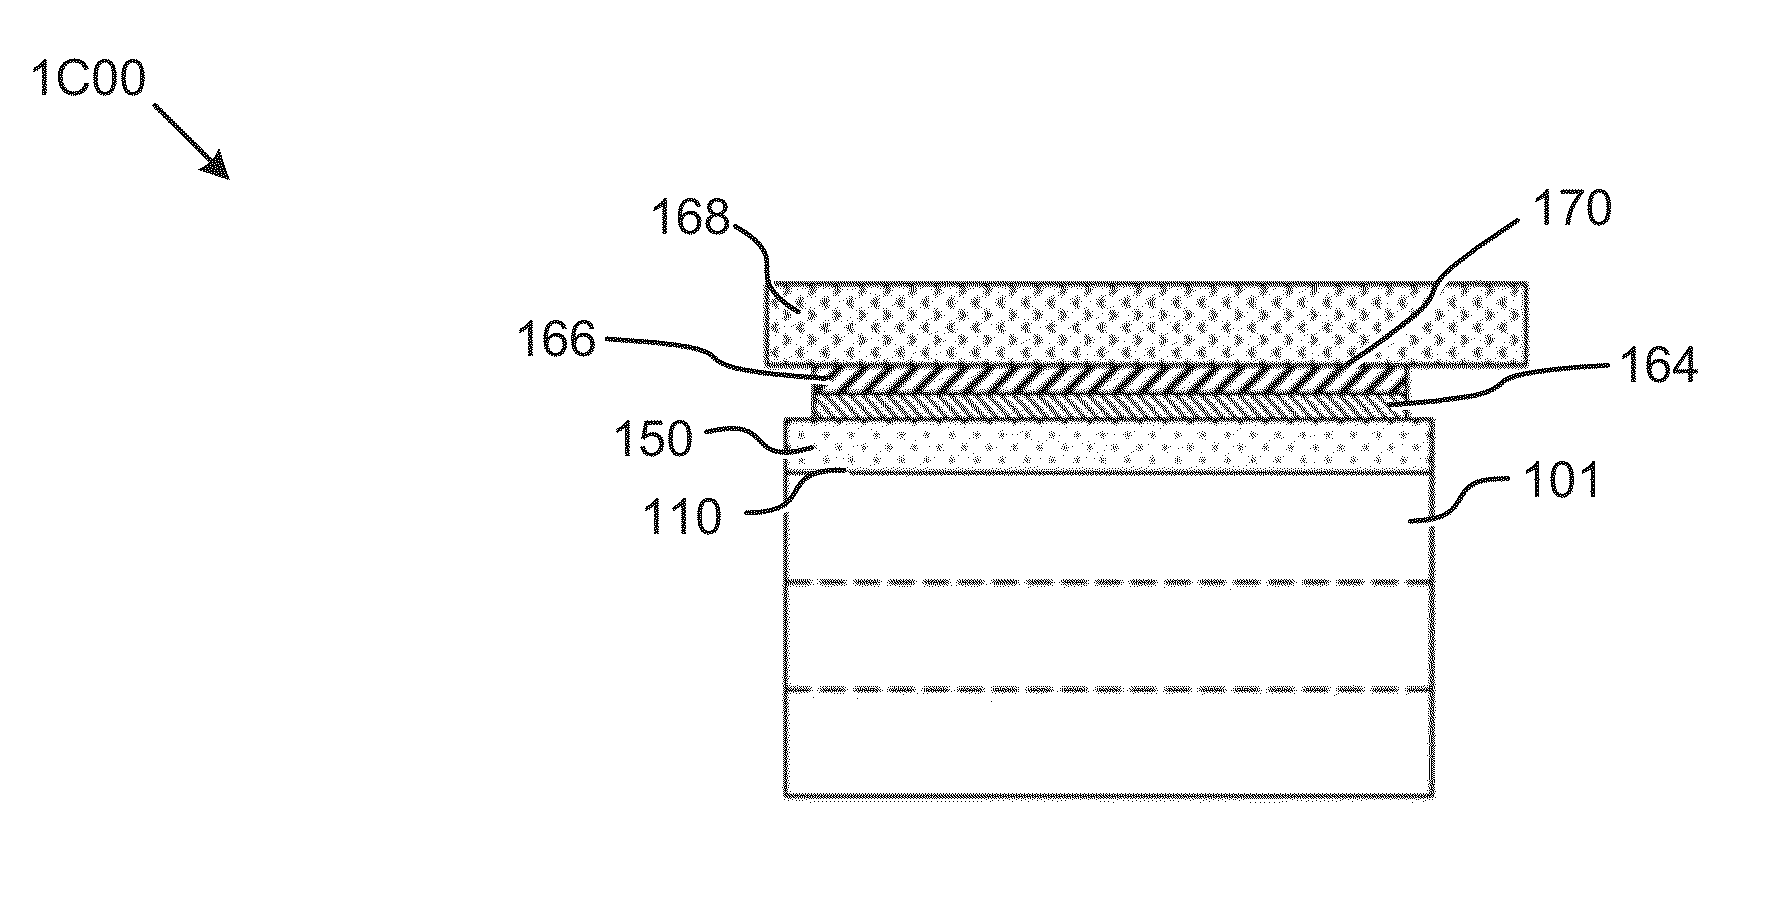 Reusable nitride wafer, method of making, and use thereof